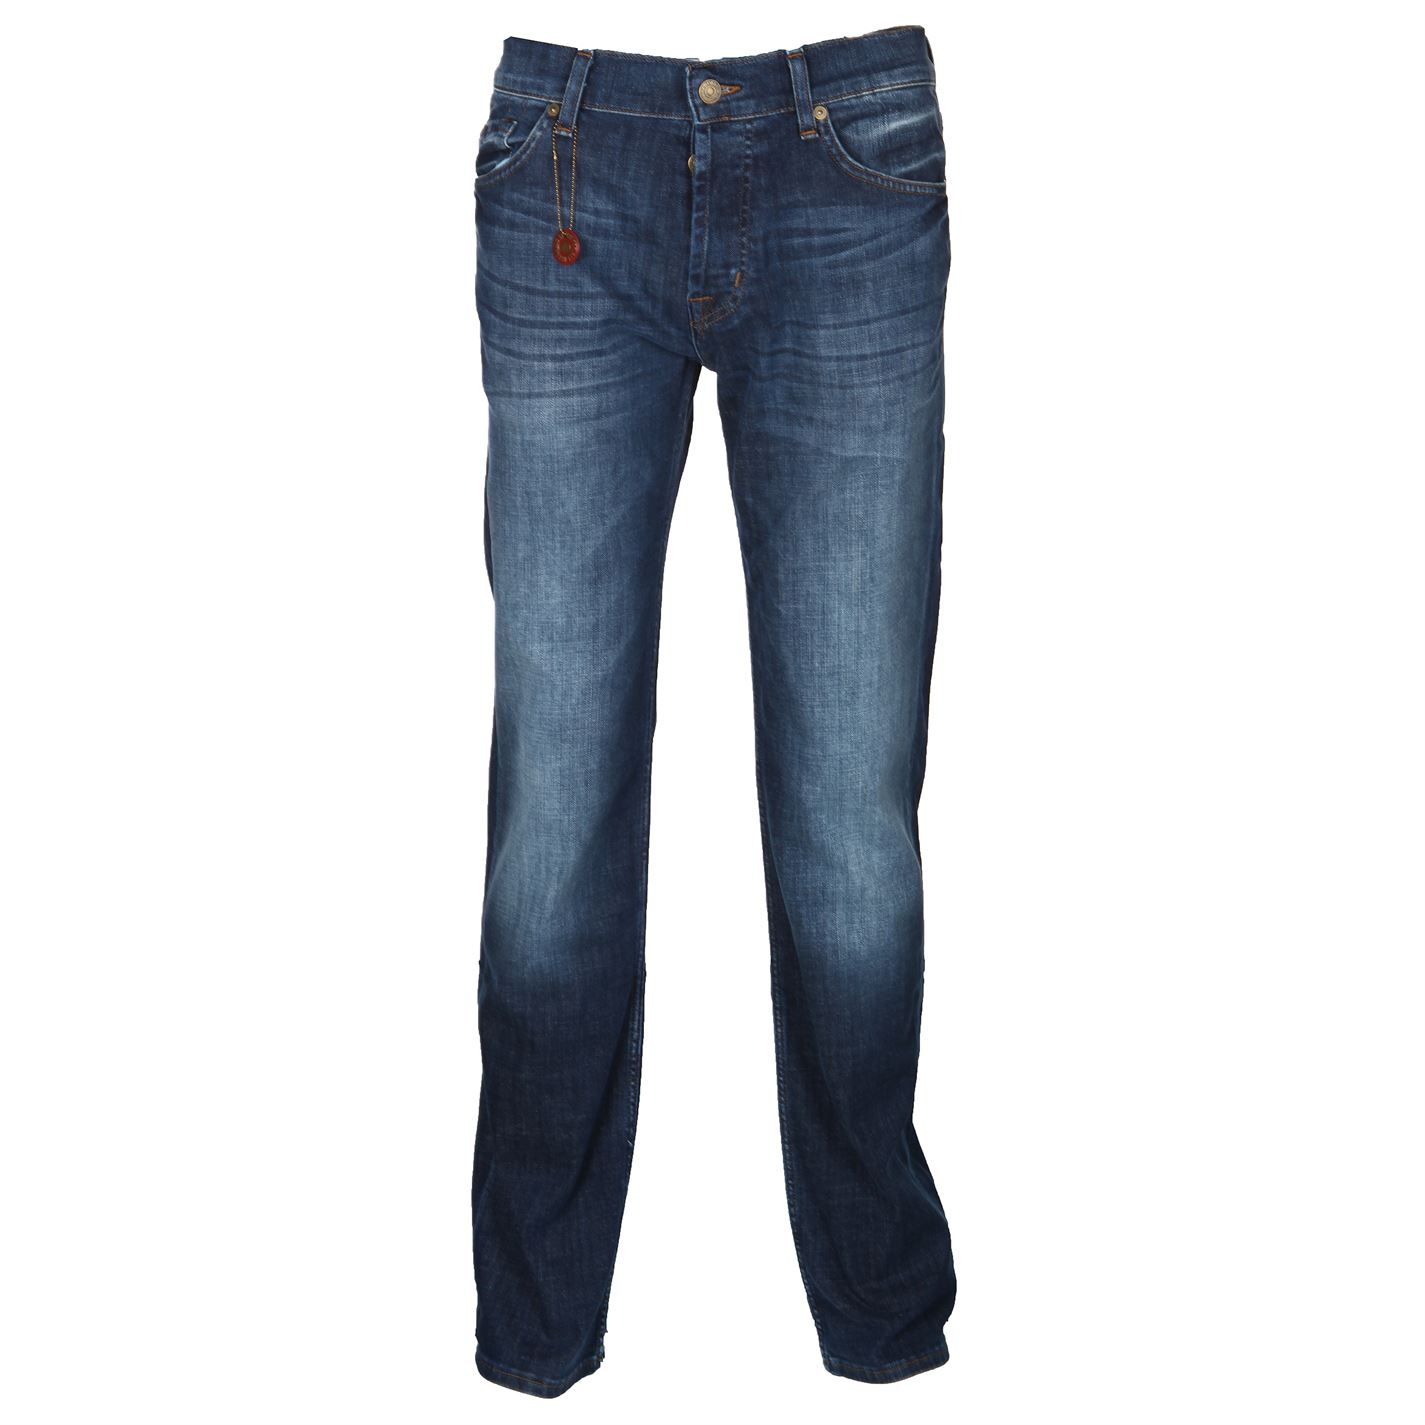 7 For All Mankind Standard American Denim Jeans - Cruise Fashion ...